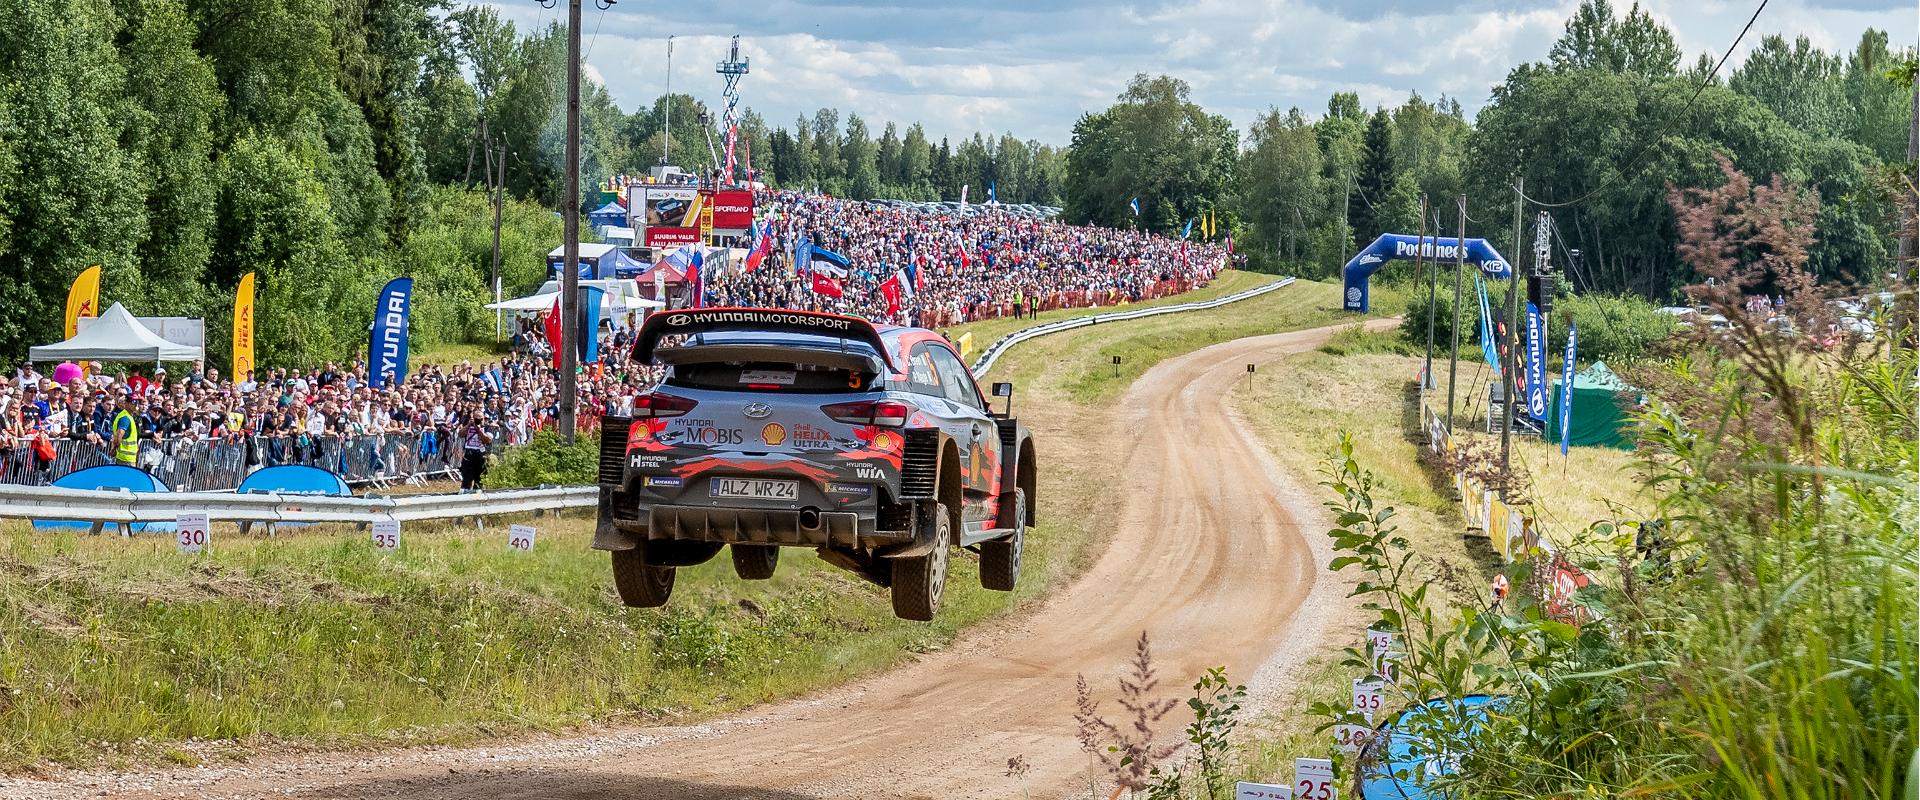 The FIA European Rally Championship stage, ERC Delfi Rally Estonia 2024, will be held on the roads of Tartu and South Estonia from July 5th to 7th. Th